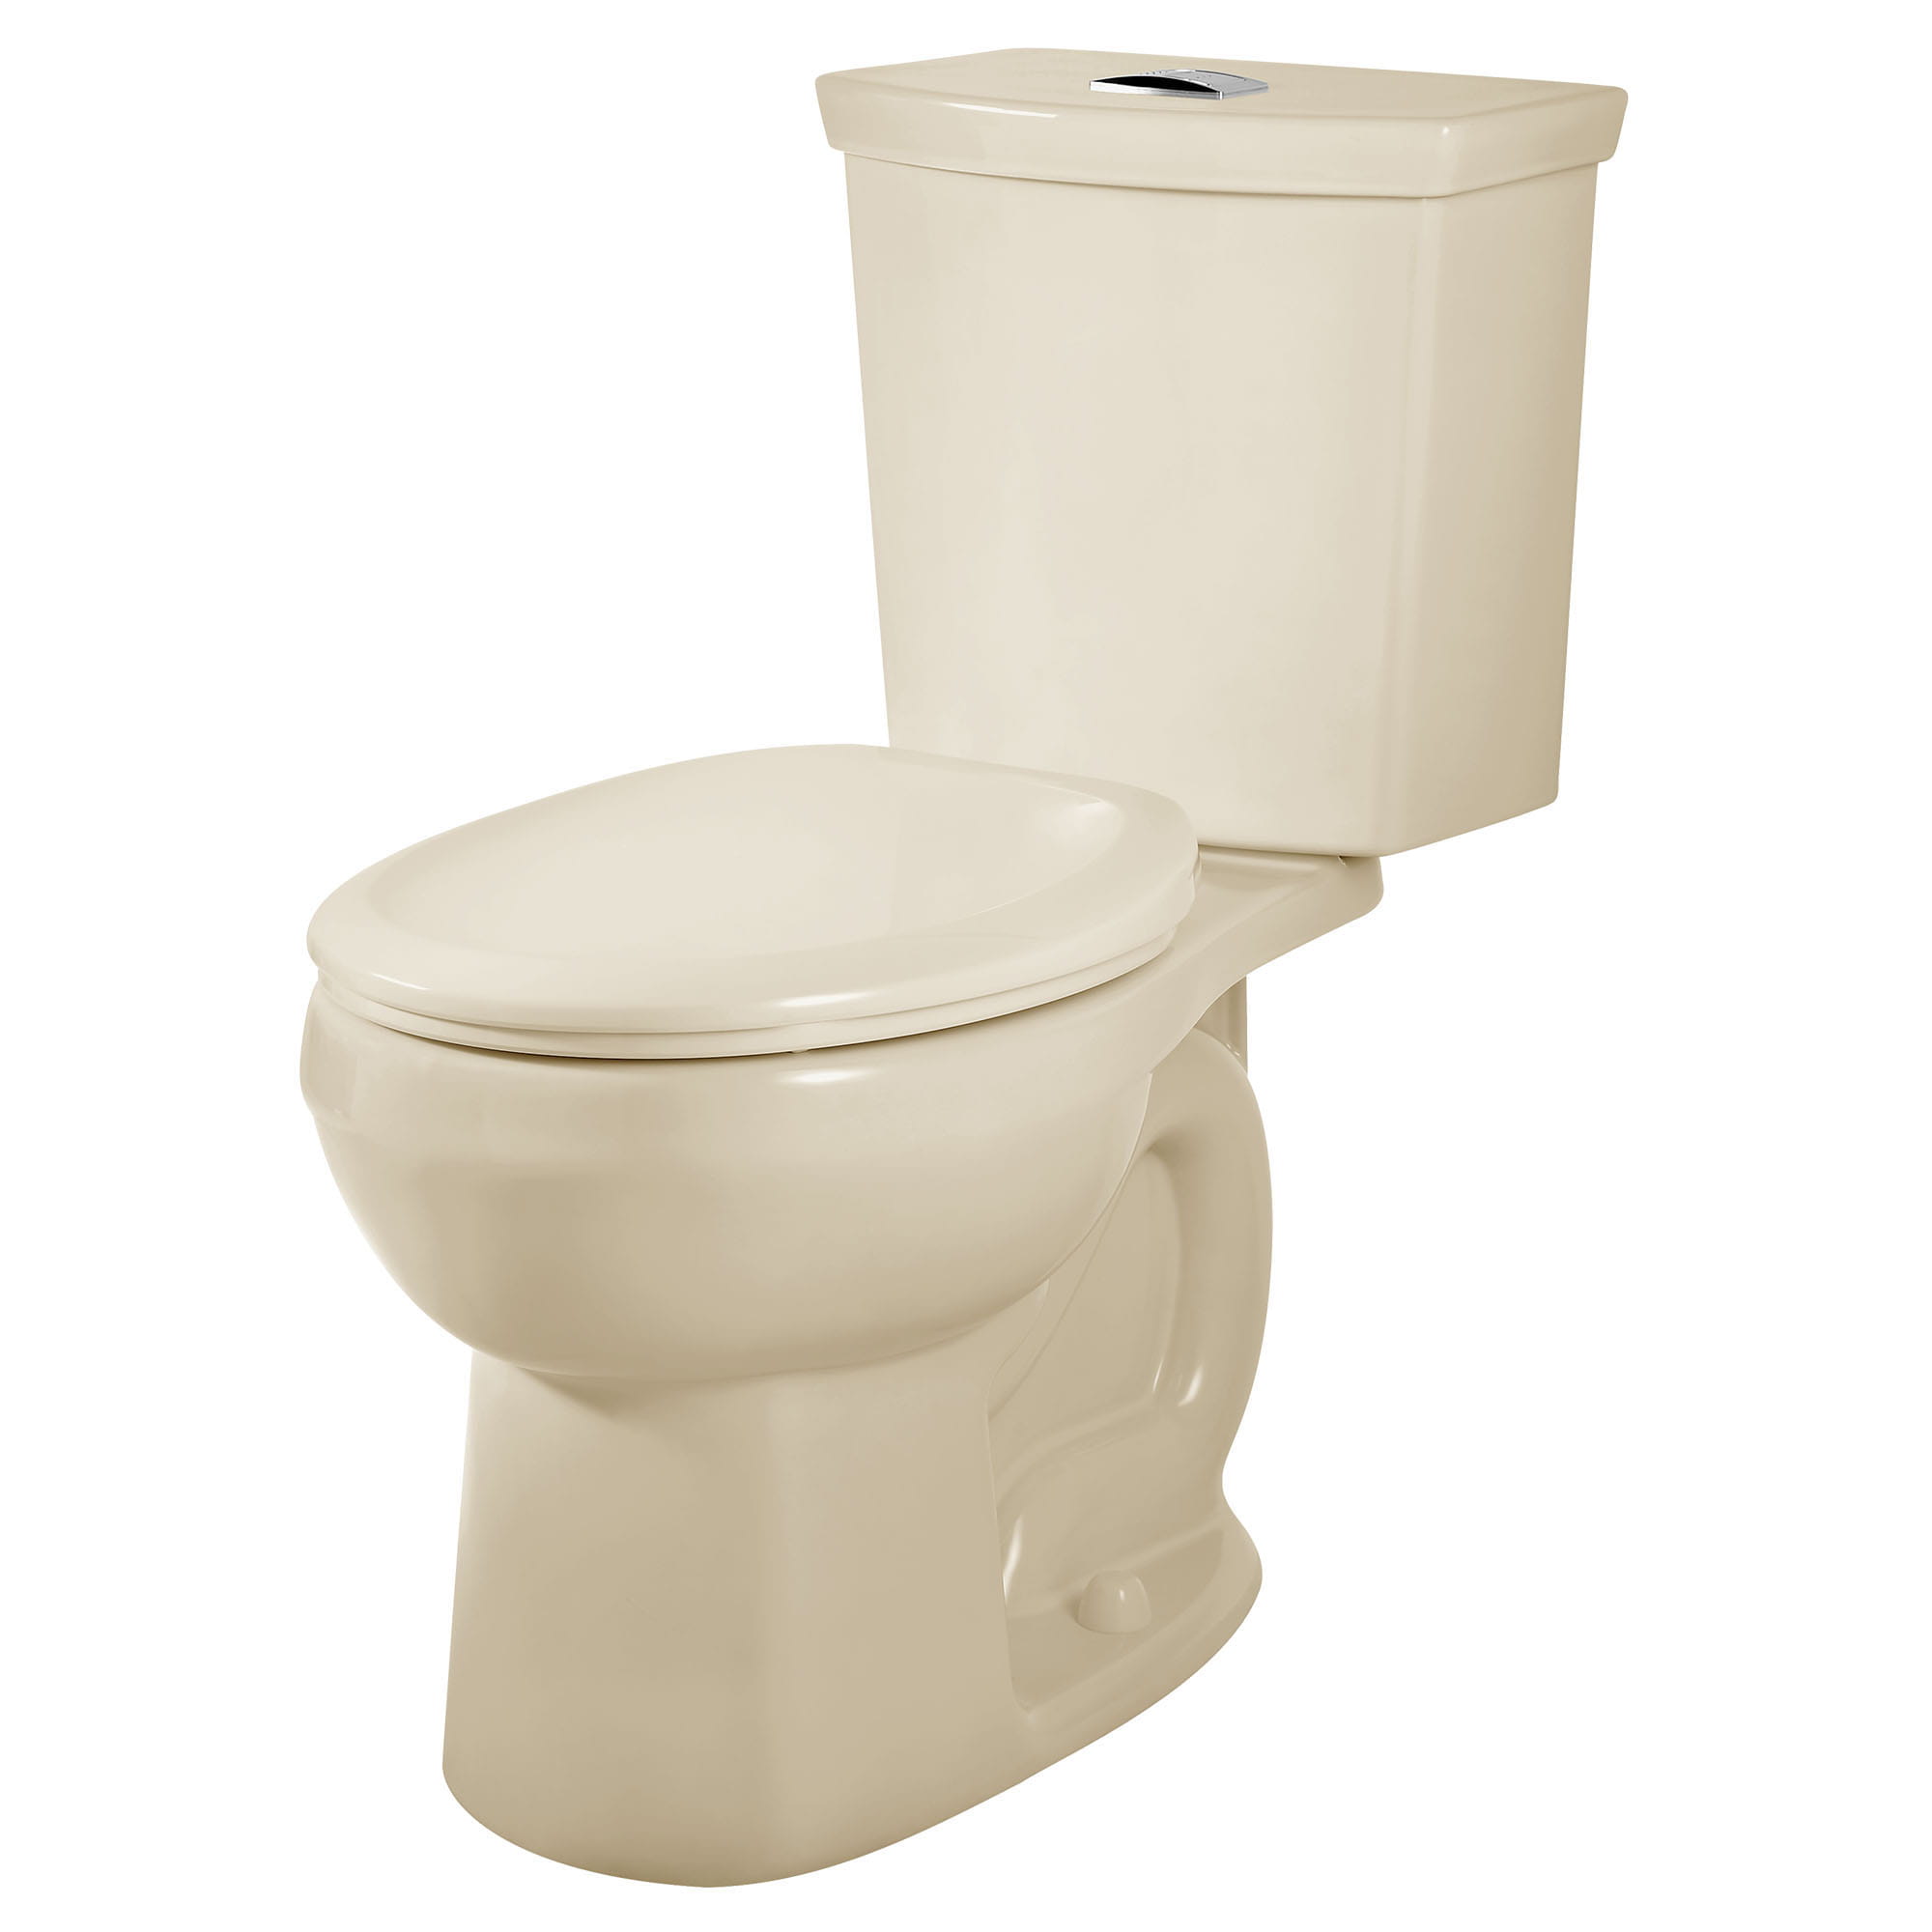 Bone American Standard 2889218.021 H2Option Siphonic Dual Flush Normal Height Round Front Toilet 2-Piece